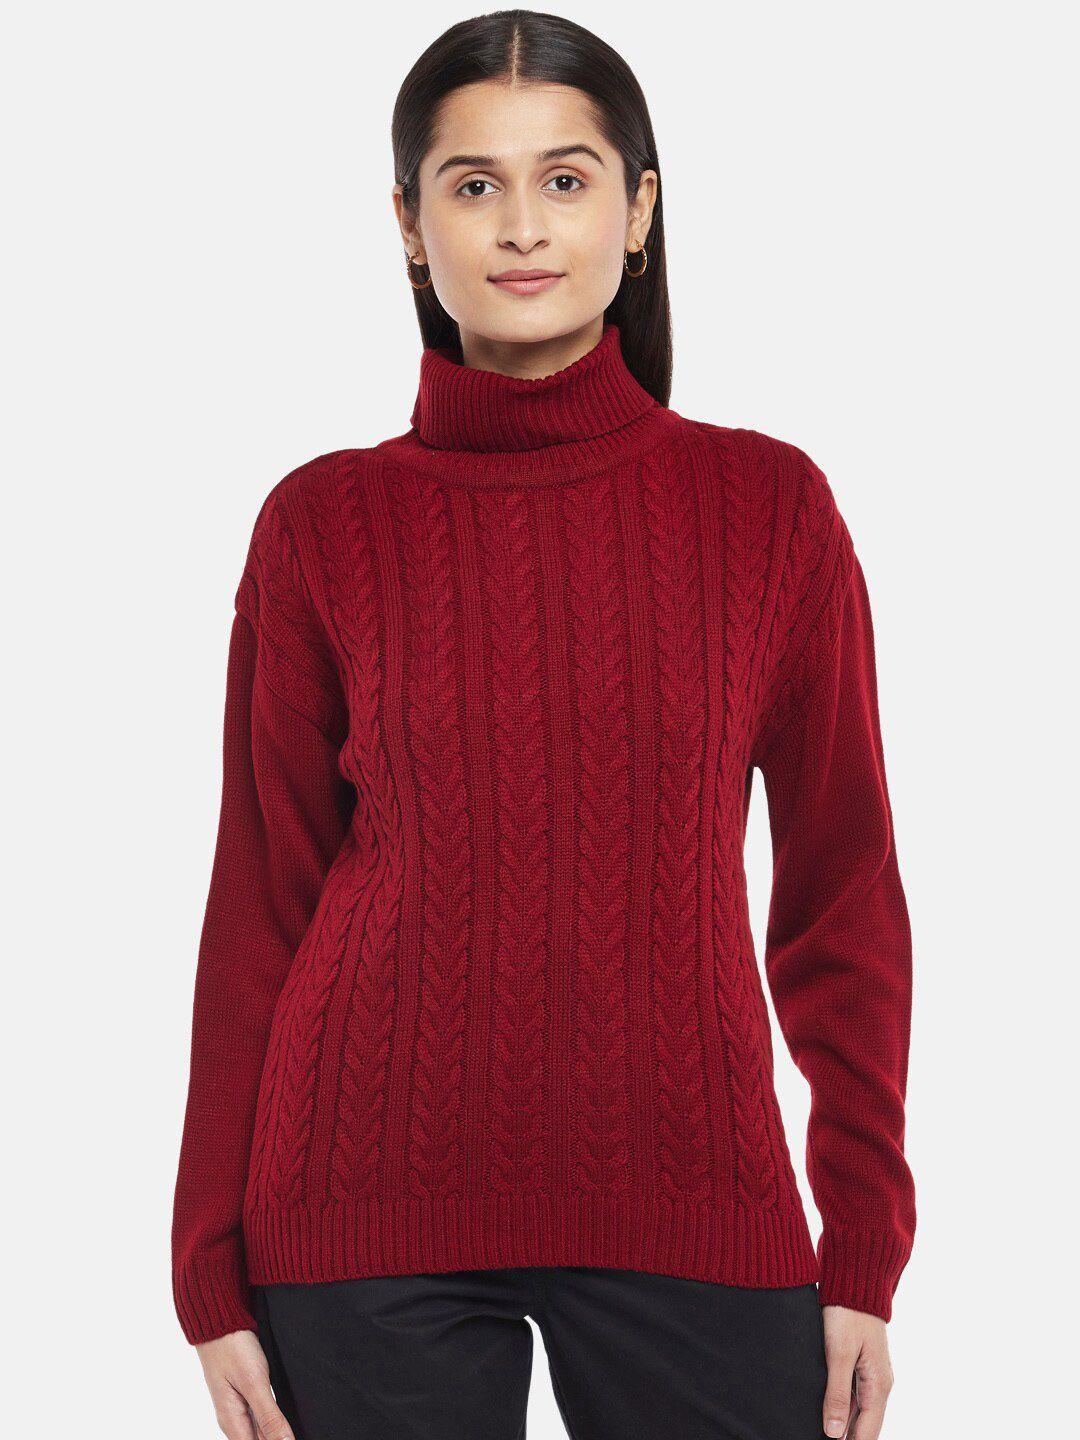 honey by pantaloons women red cable knit pullover